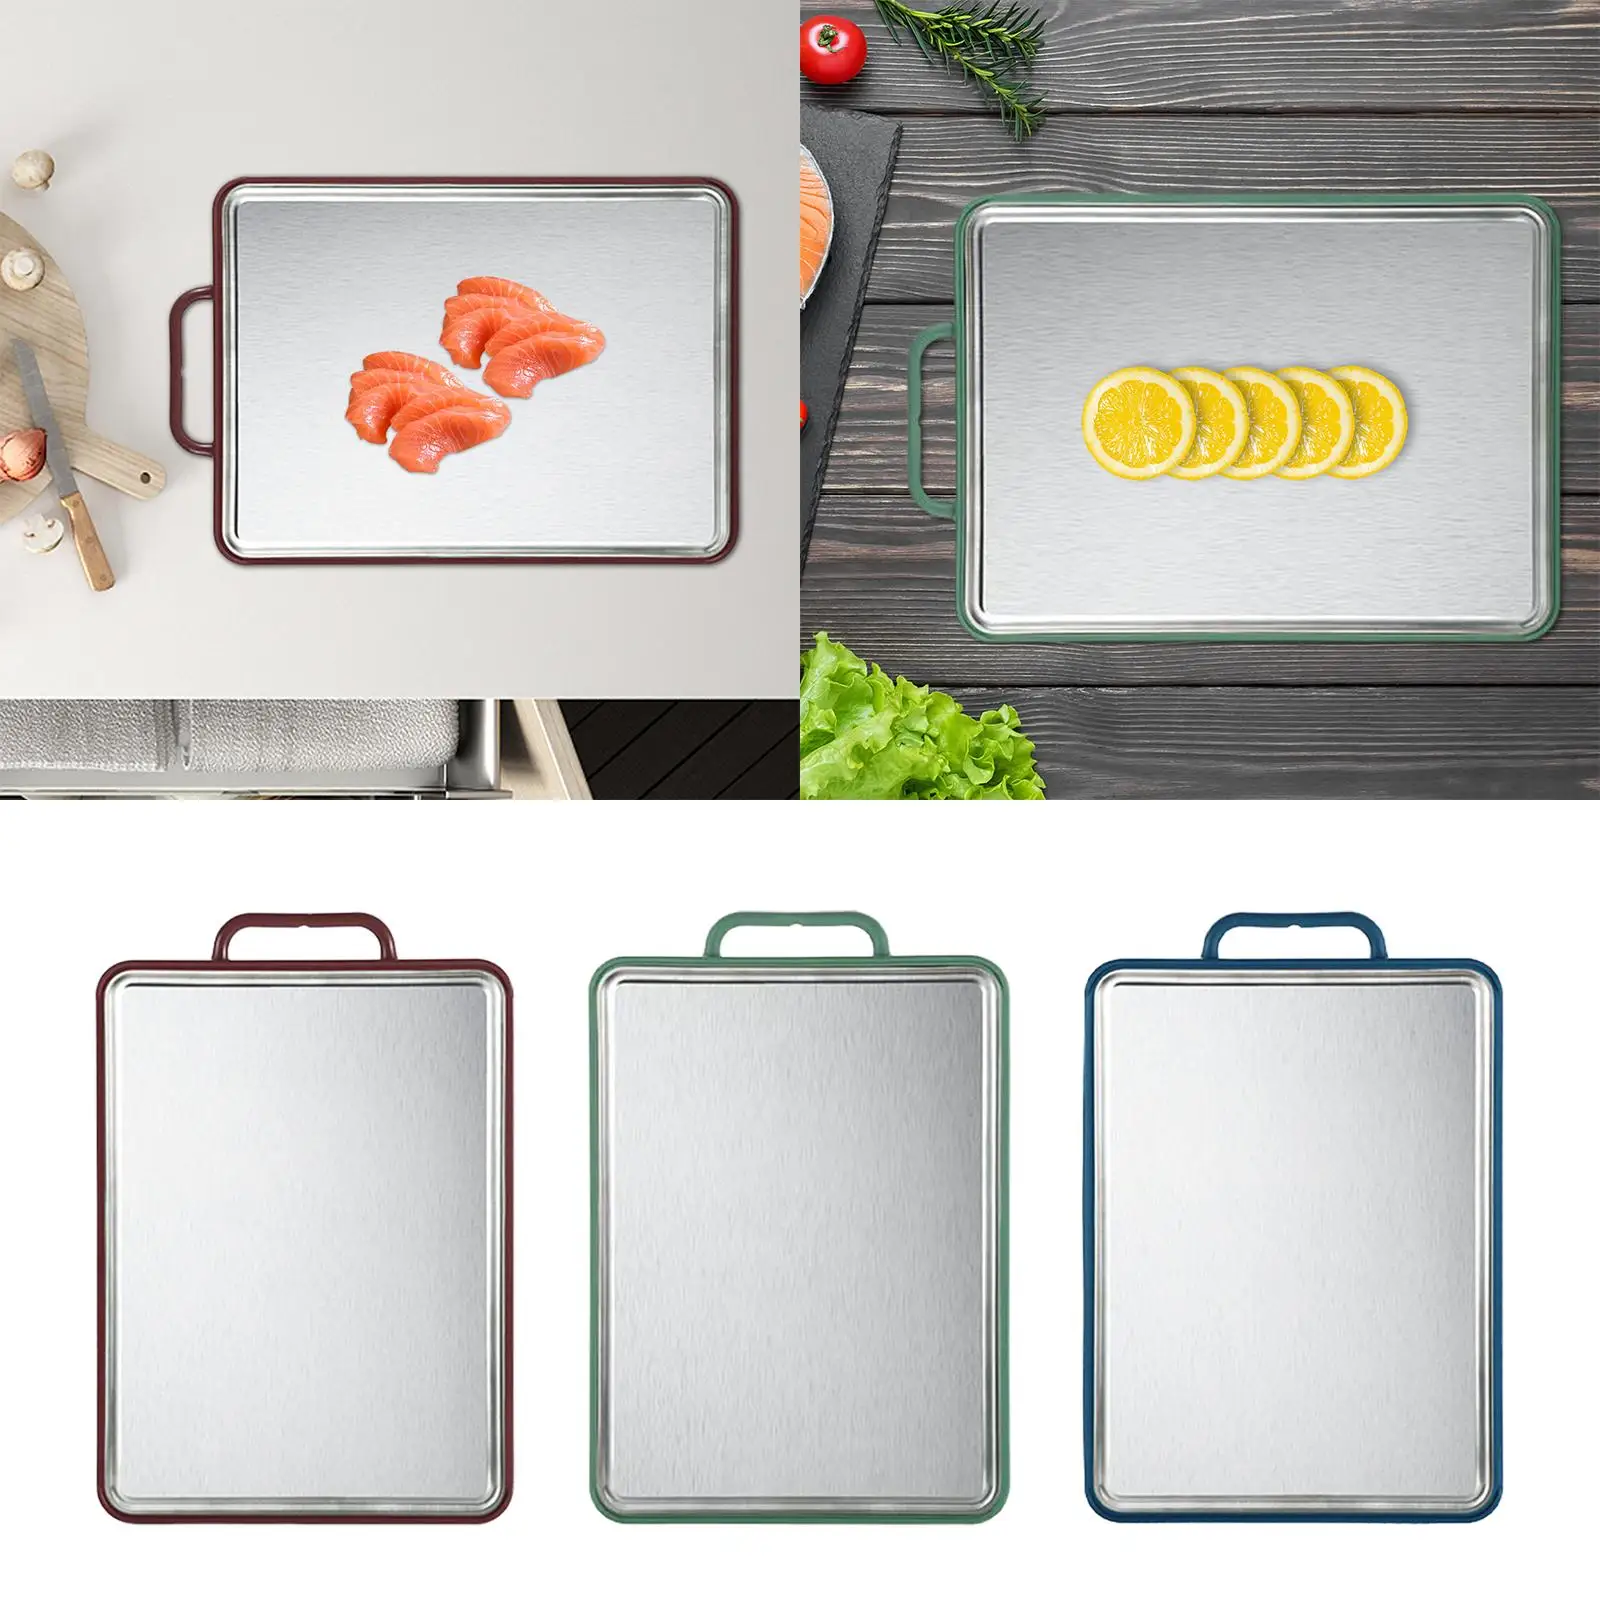 Double Sided Cutting Board Chopping Board Professional Anti Slip Multifunctional Convenient Cleaning Simple Tray 15.7x10.6inch